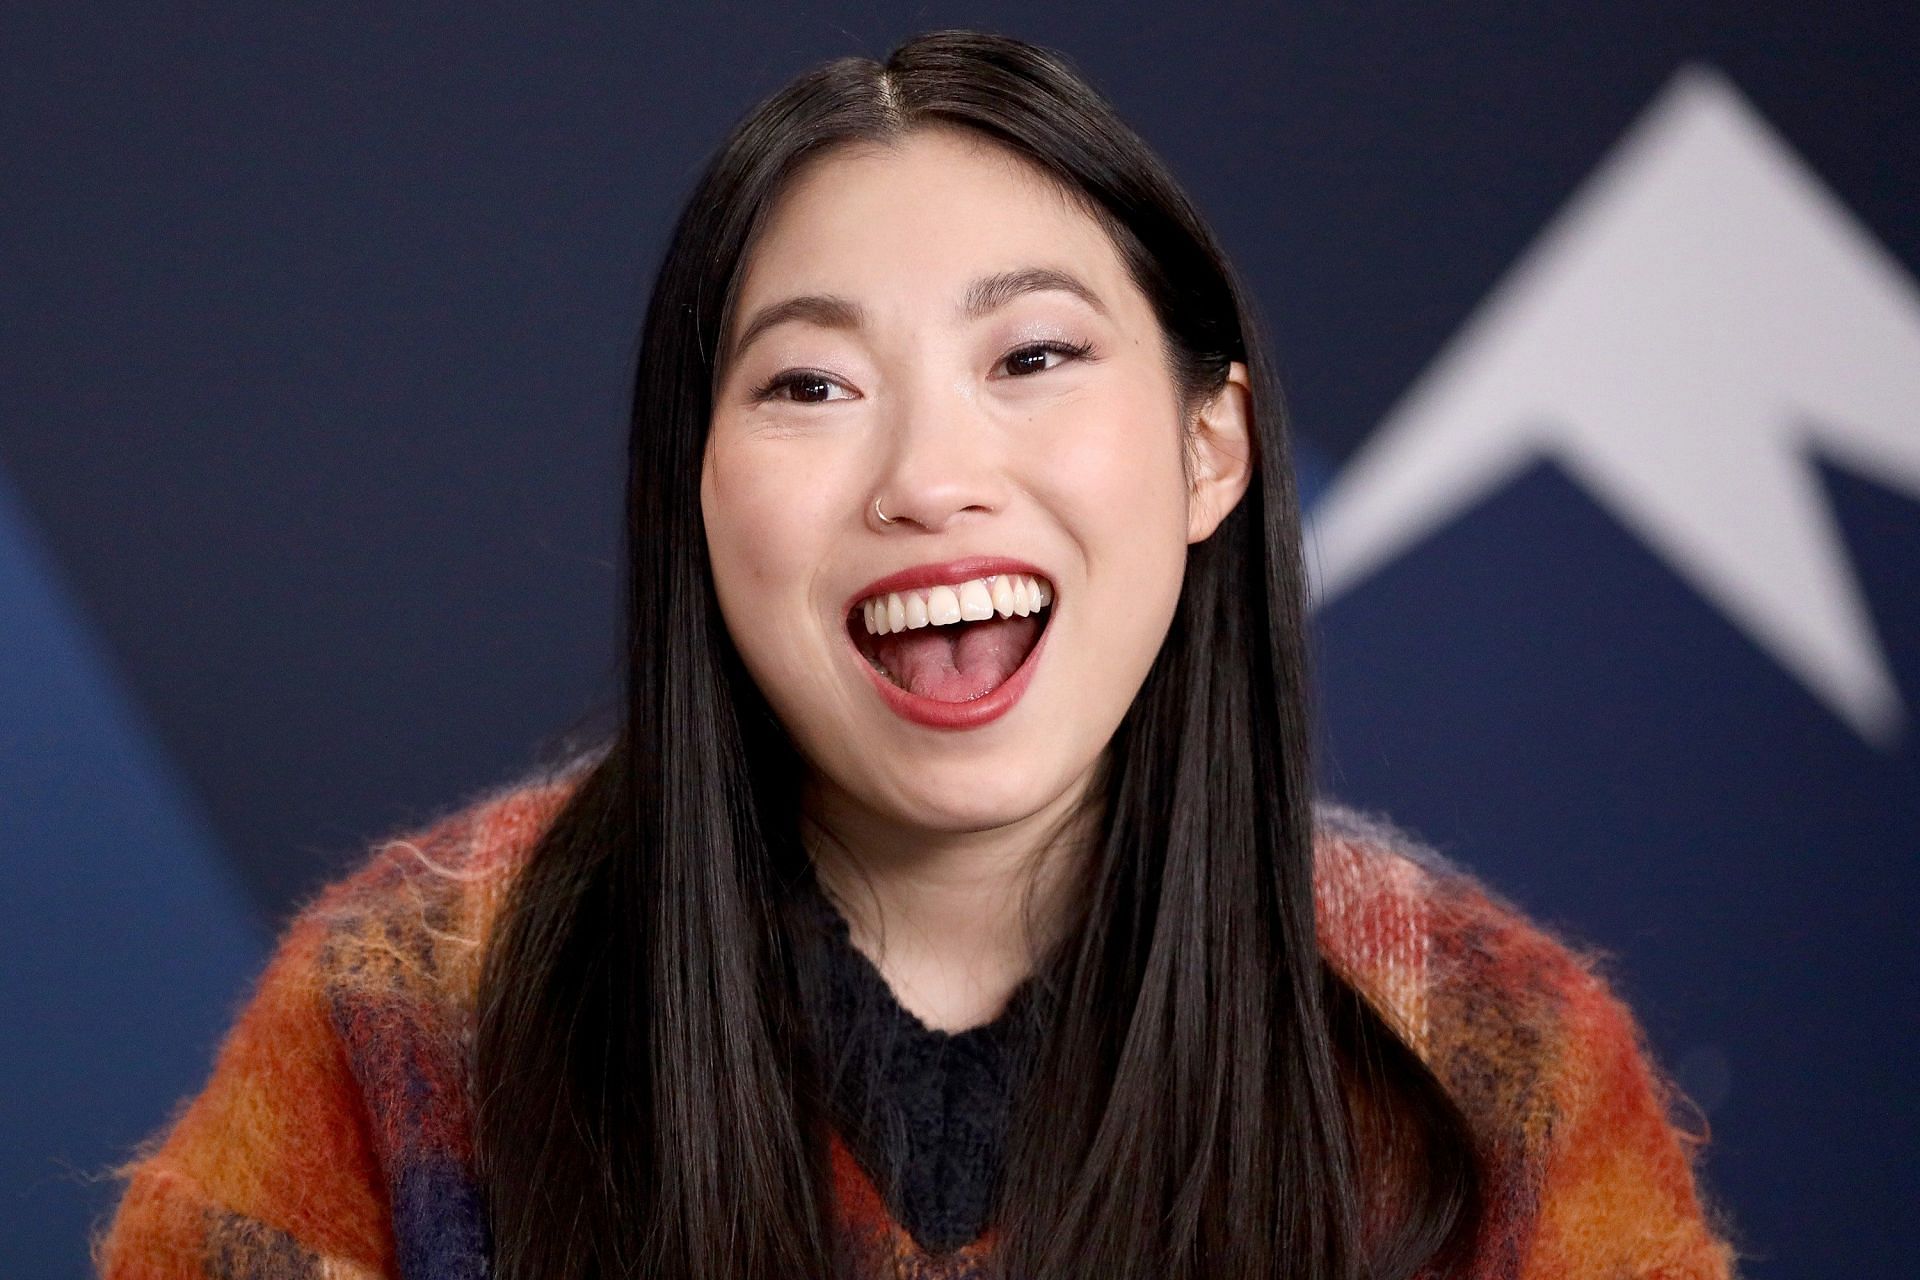 Awkwafina has impressed in her movie roles so far (Image via Allure.com)